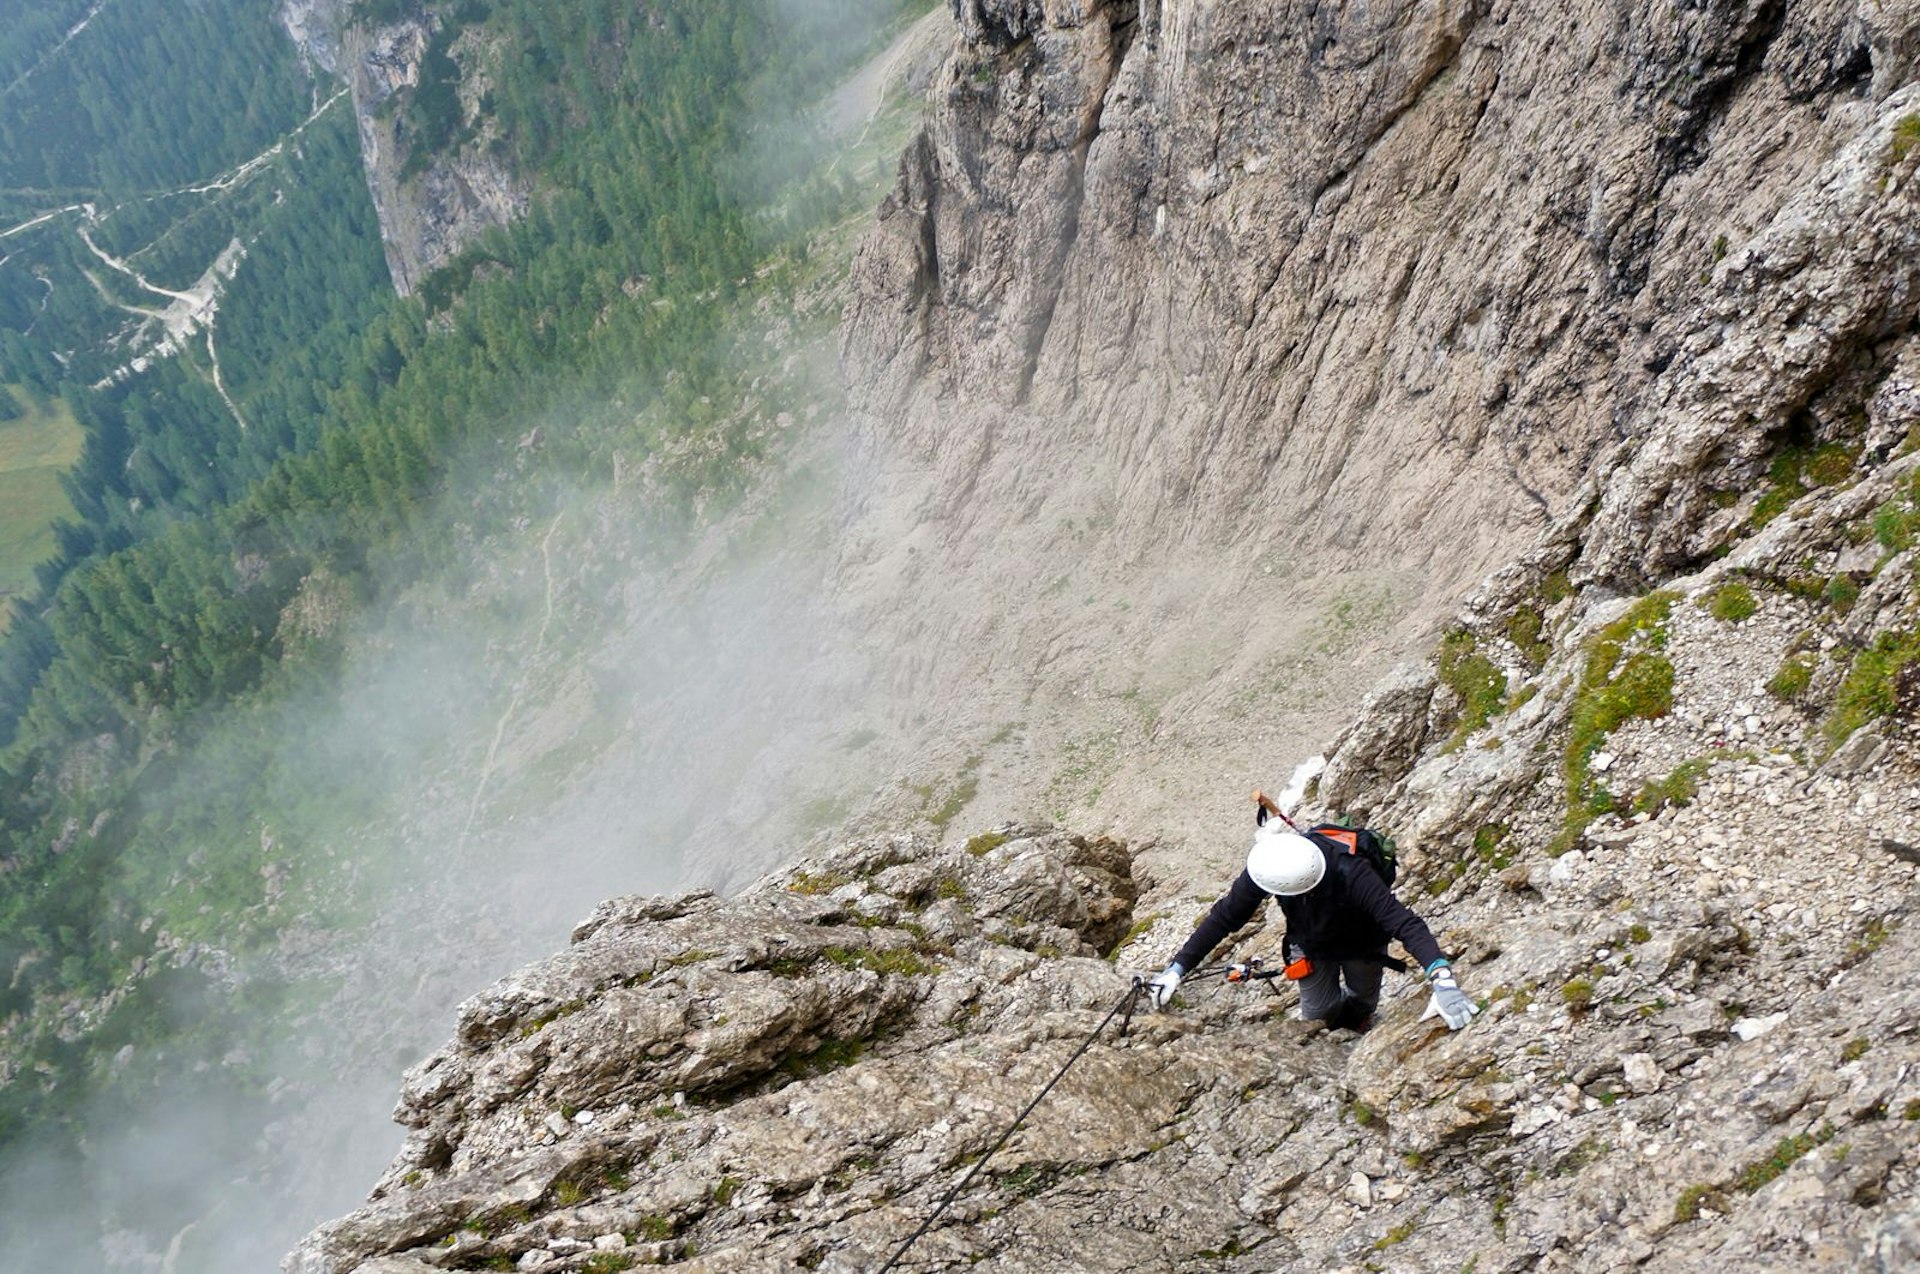 Climbing through the clouds up the Torre Exner pinnacle, with views of the Alta Badia valley below